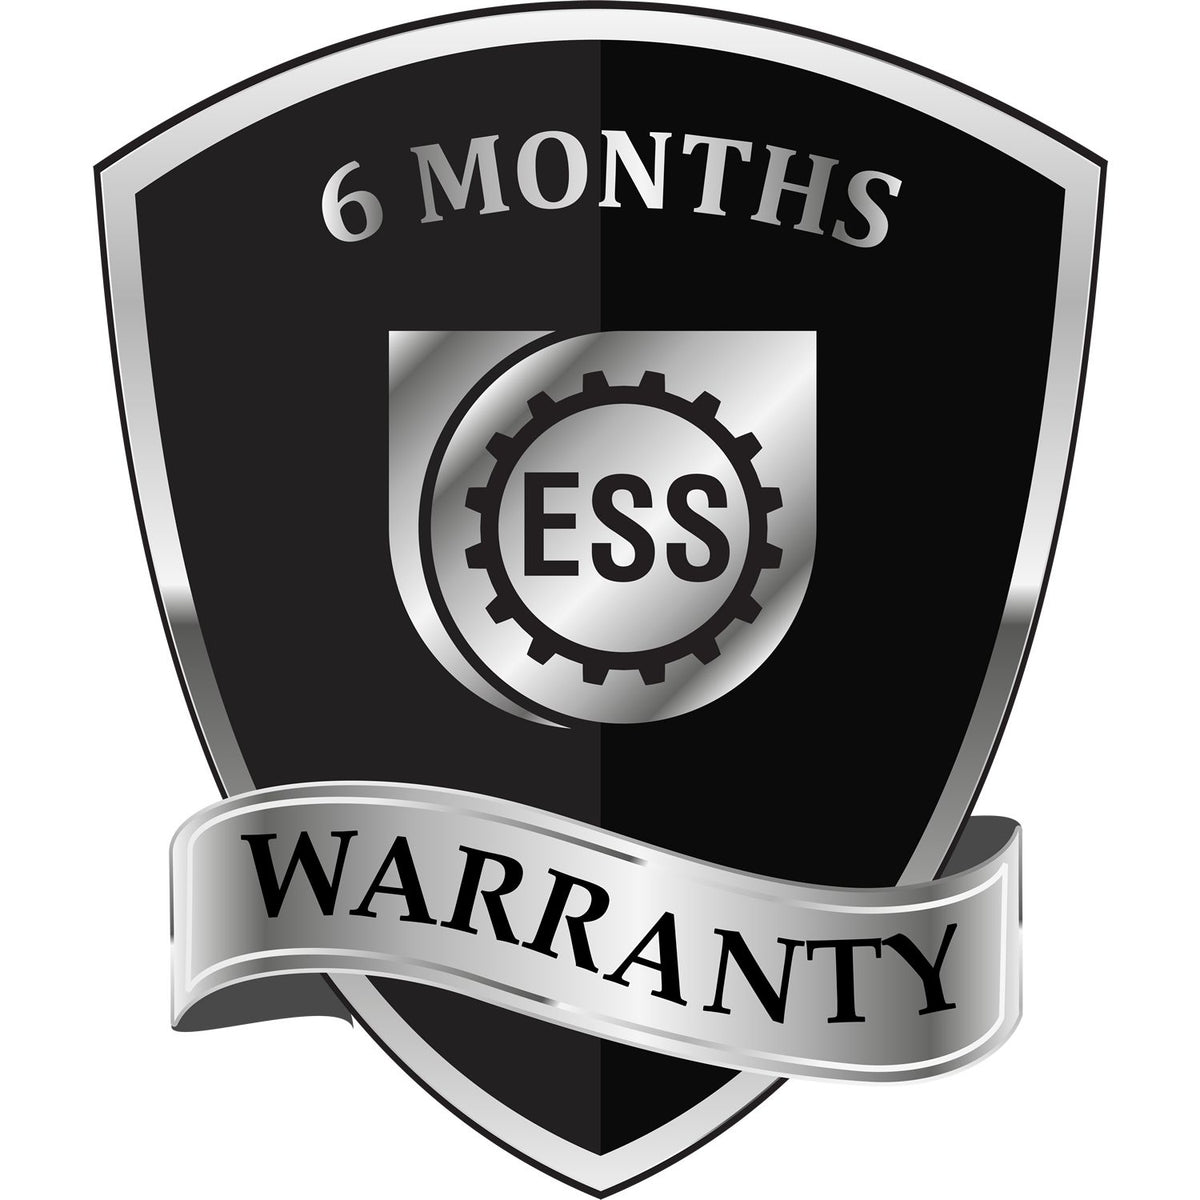 A badge or emblem showing a warranty icon for the Massachusetts Professional Engineer Seal Stamp